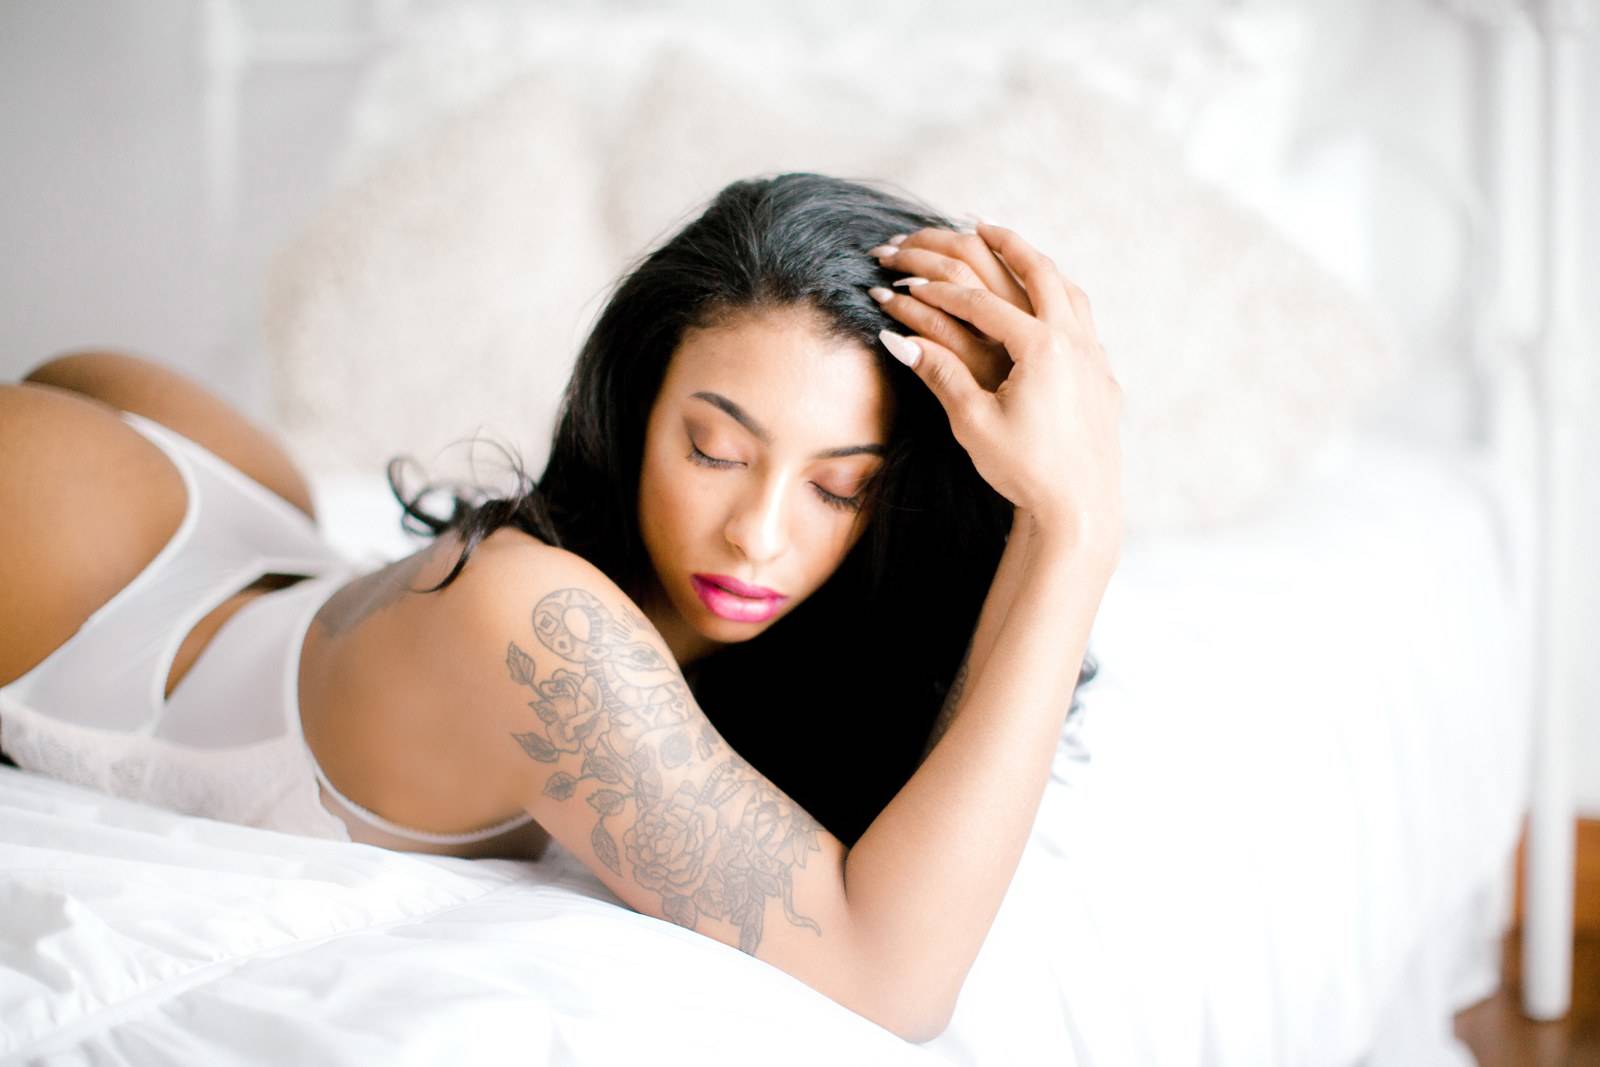 Boudoir Session by Yours Truly Portraiture